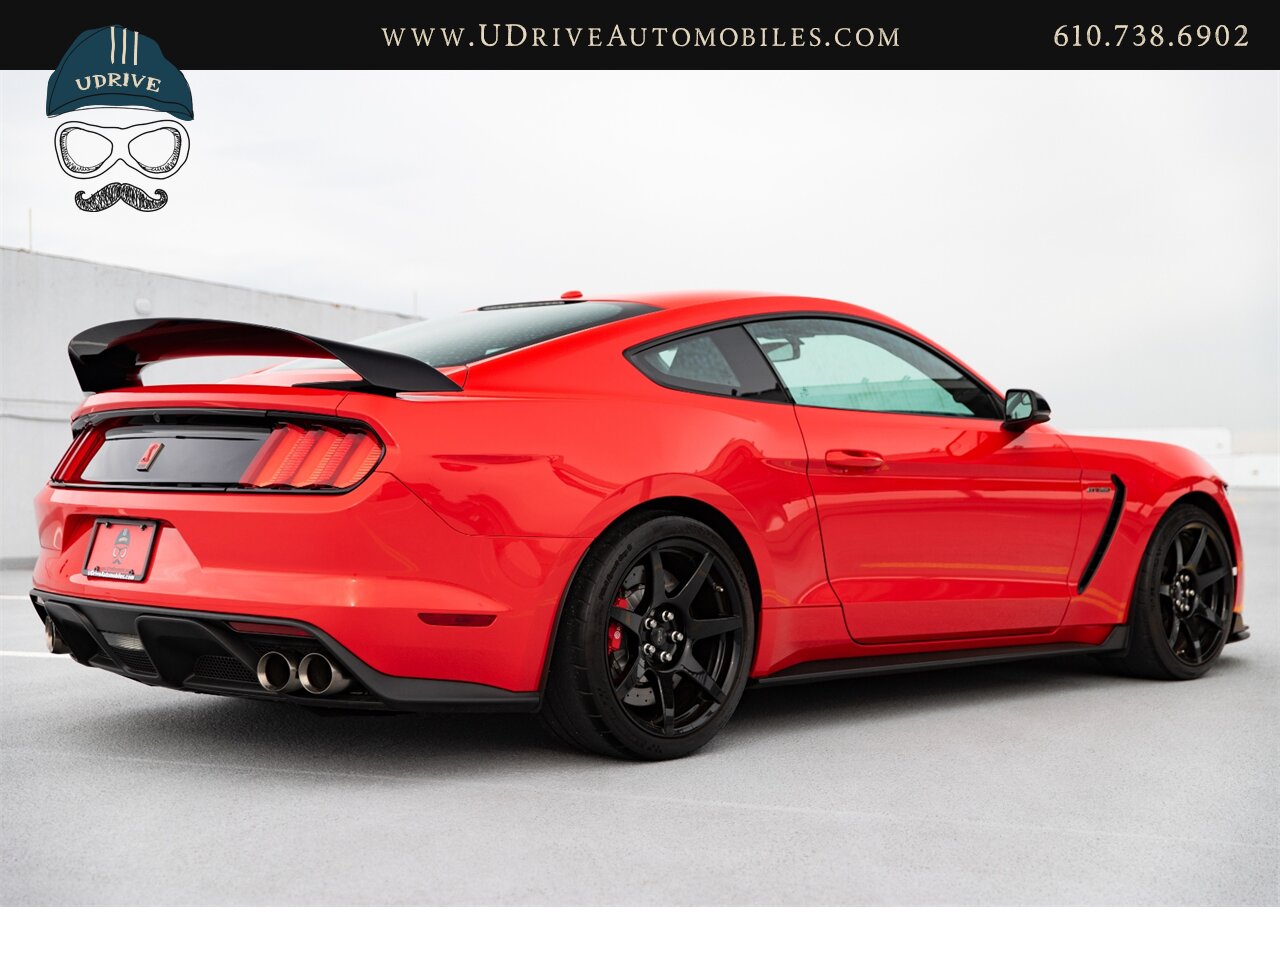 2016 Ford Mustang Shelby GT350R 3k Miles Electronics Pkg  1 of 32 Race Red Produced for USA As New - Photo 23 - West Chester, PA 19382